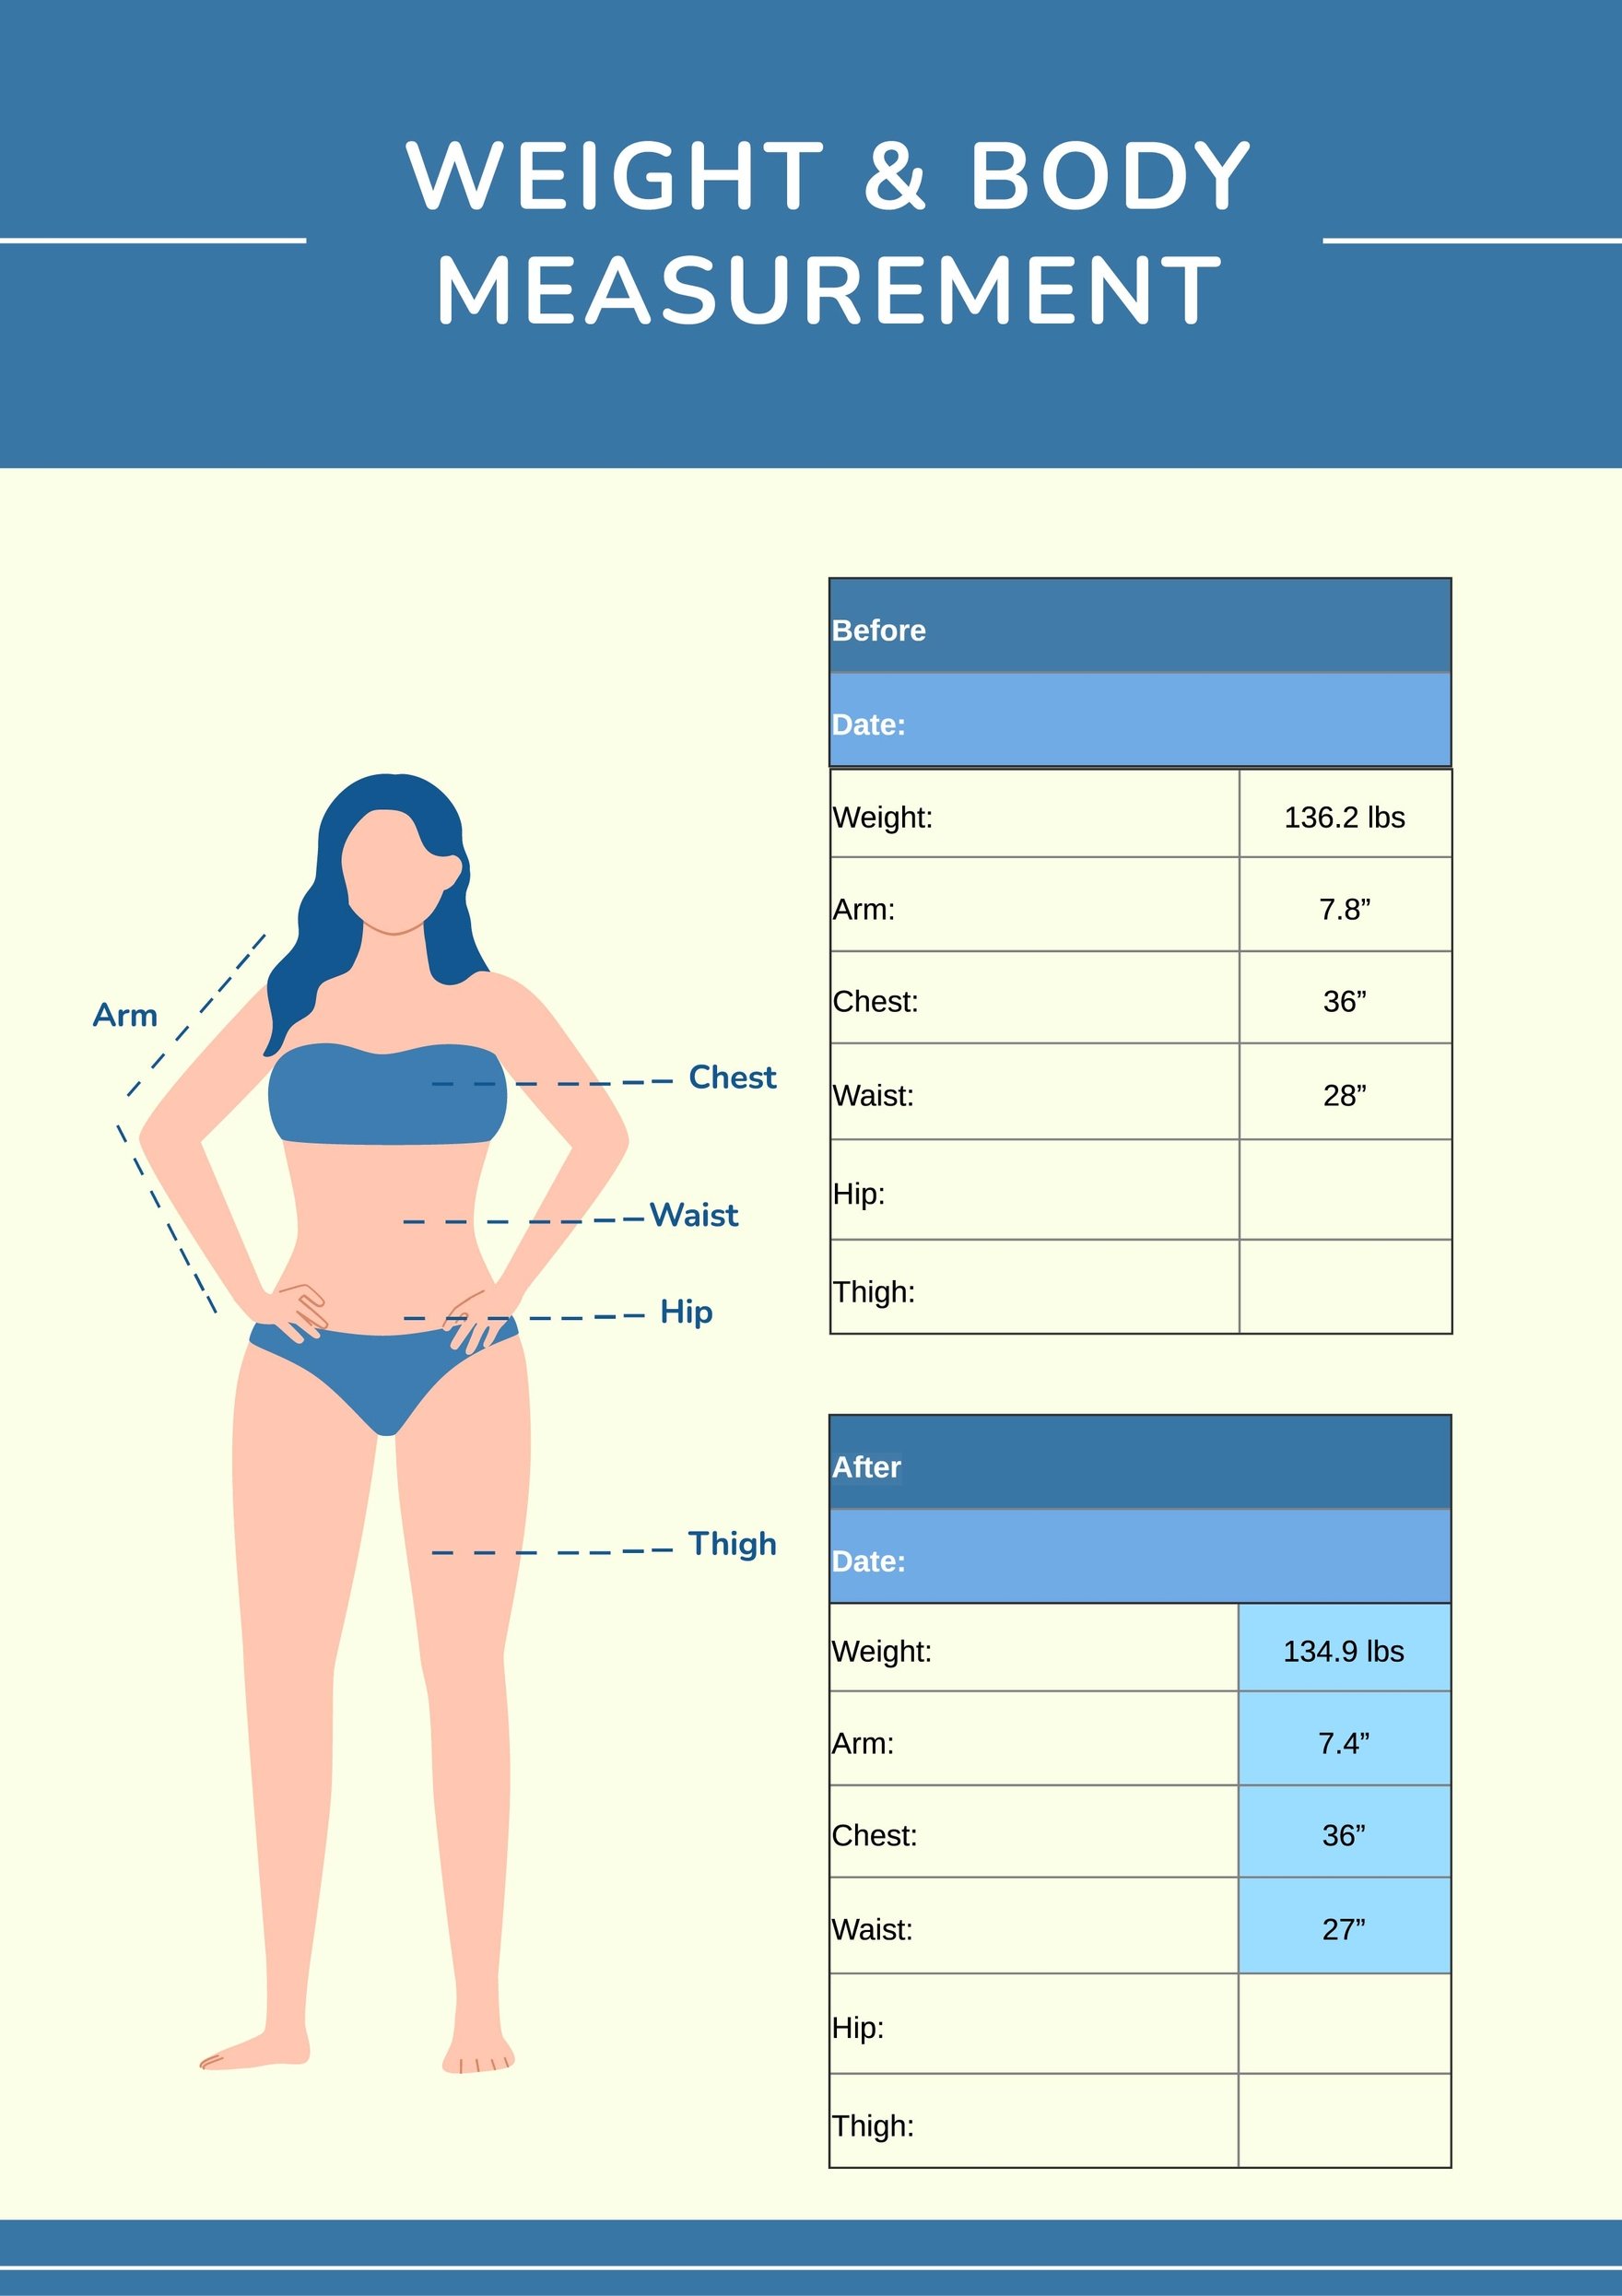 https://images.template.net/122741/weight---body-measurement-chart-fhqc4.jpg